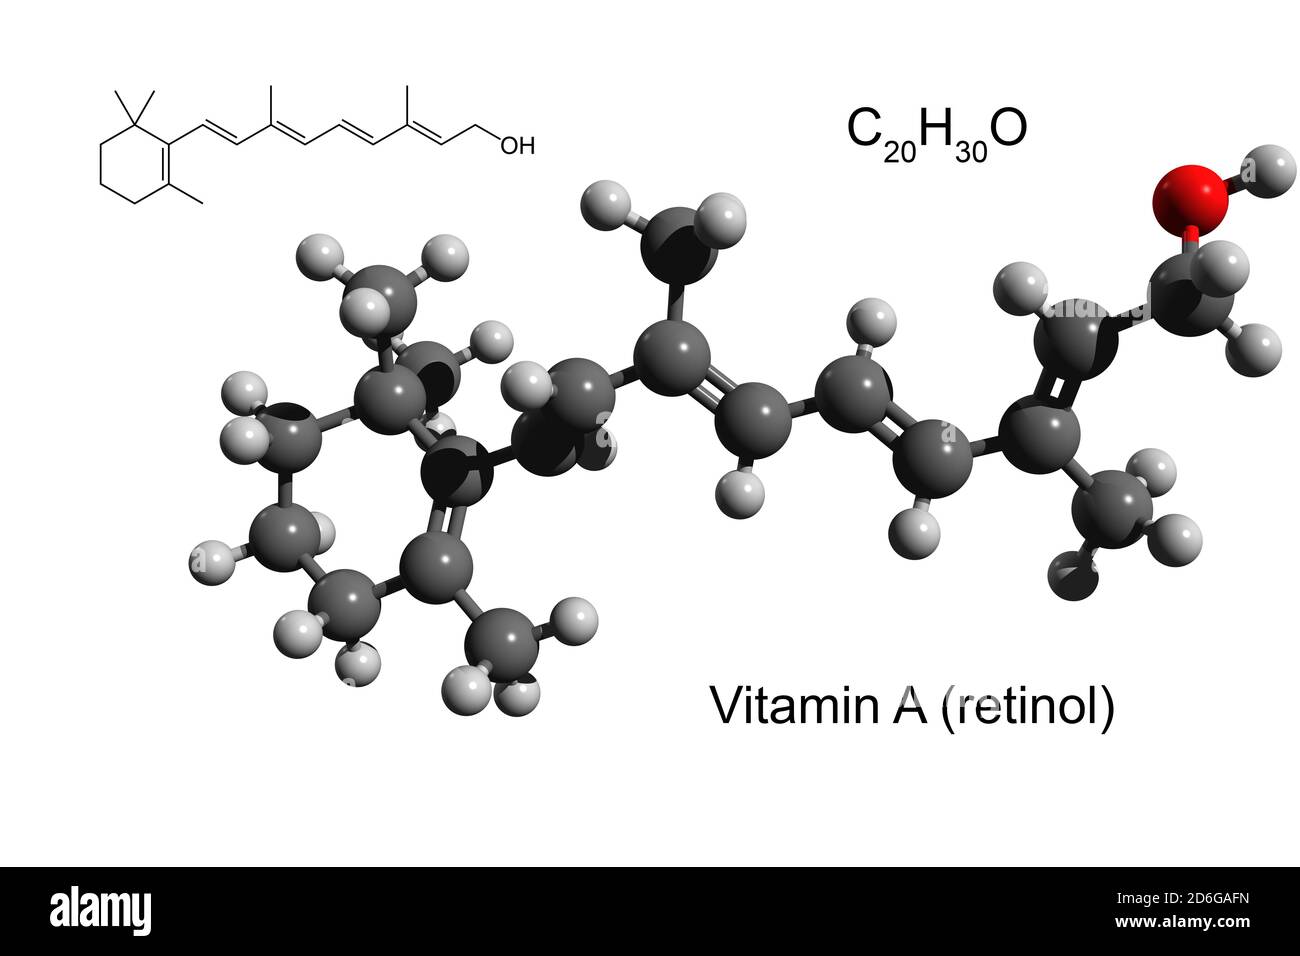 Chemical formula, structural formula and 3D ball-and-stick model of vitamin A (retinol), white background Stock Photo